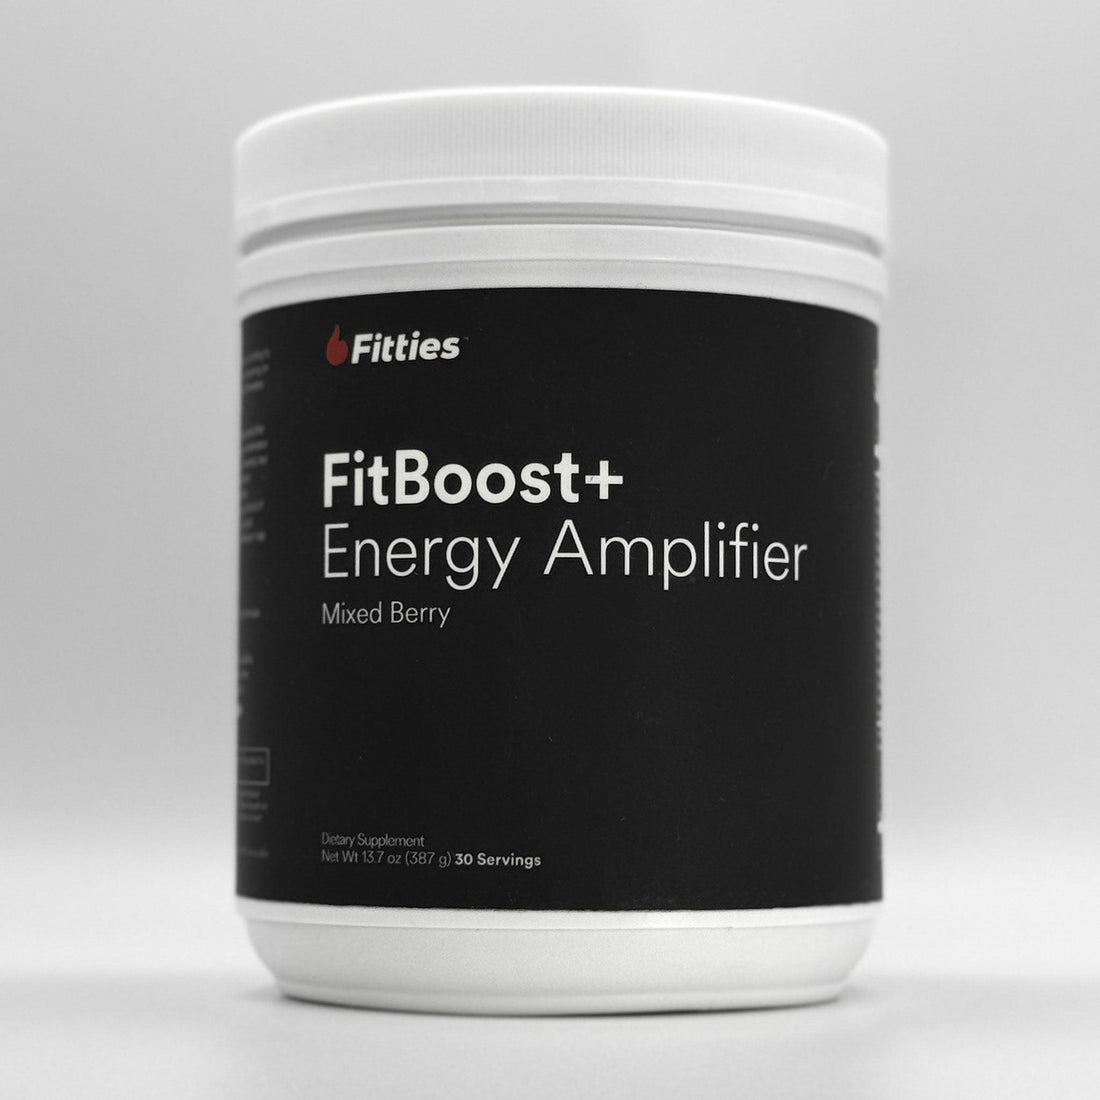 Fitties FitBoost+ front label